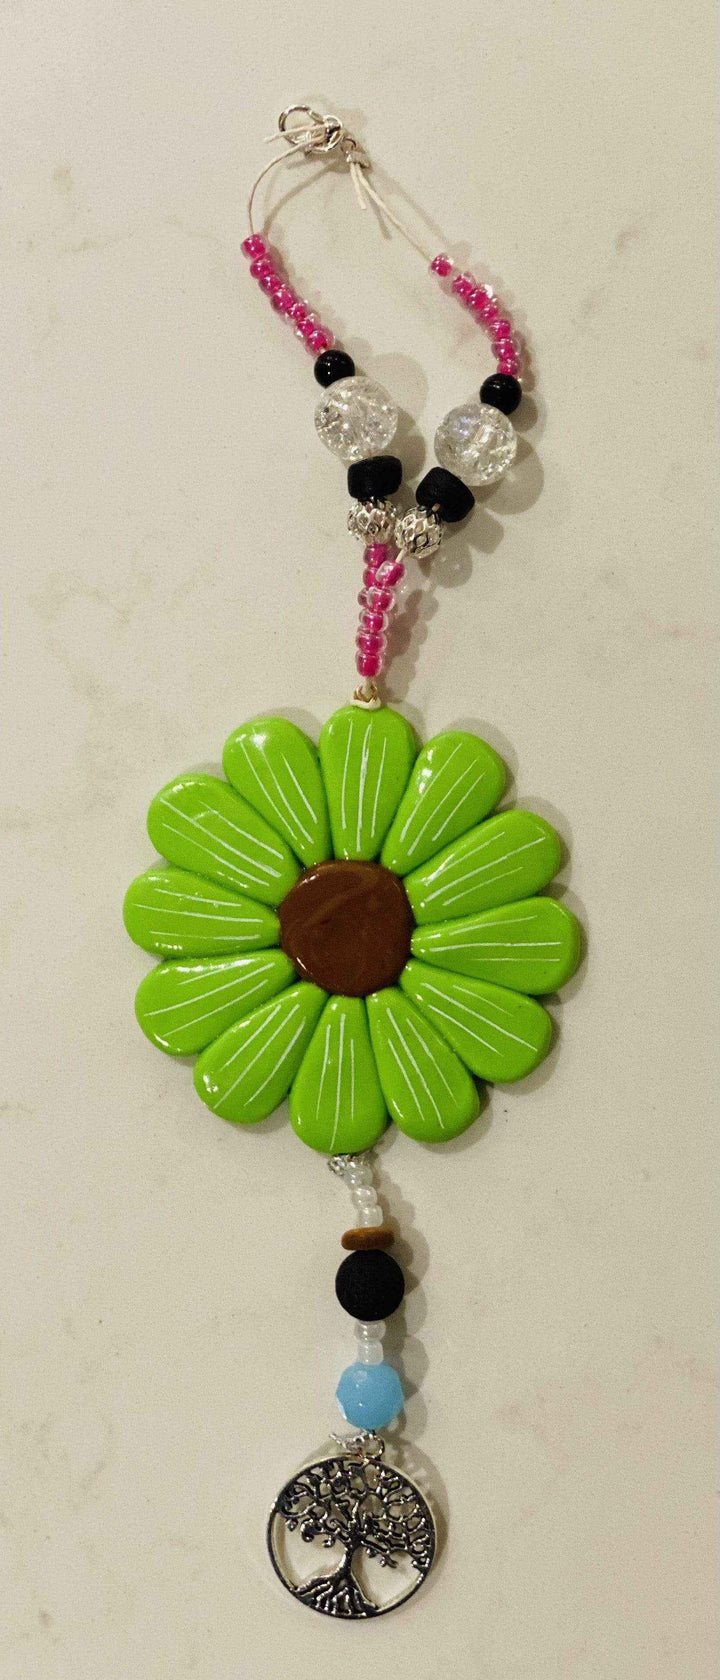 Atlantic Wood N Wares Home & Garden>Home Décor>Kitchen Accessories Lime Green Support IWK Foundation with Sofia Daisy Charms! Charm01